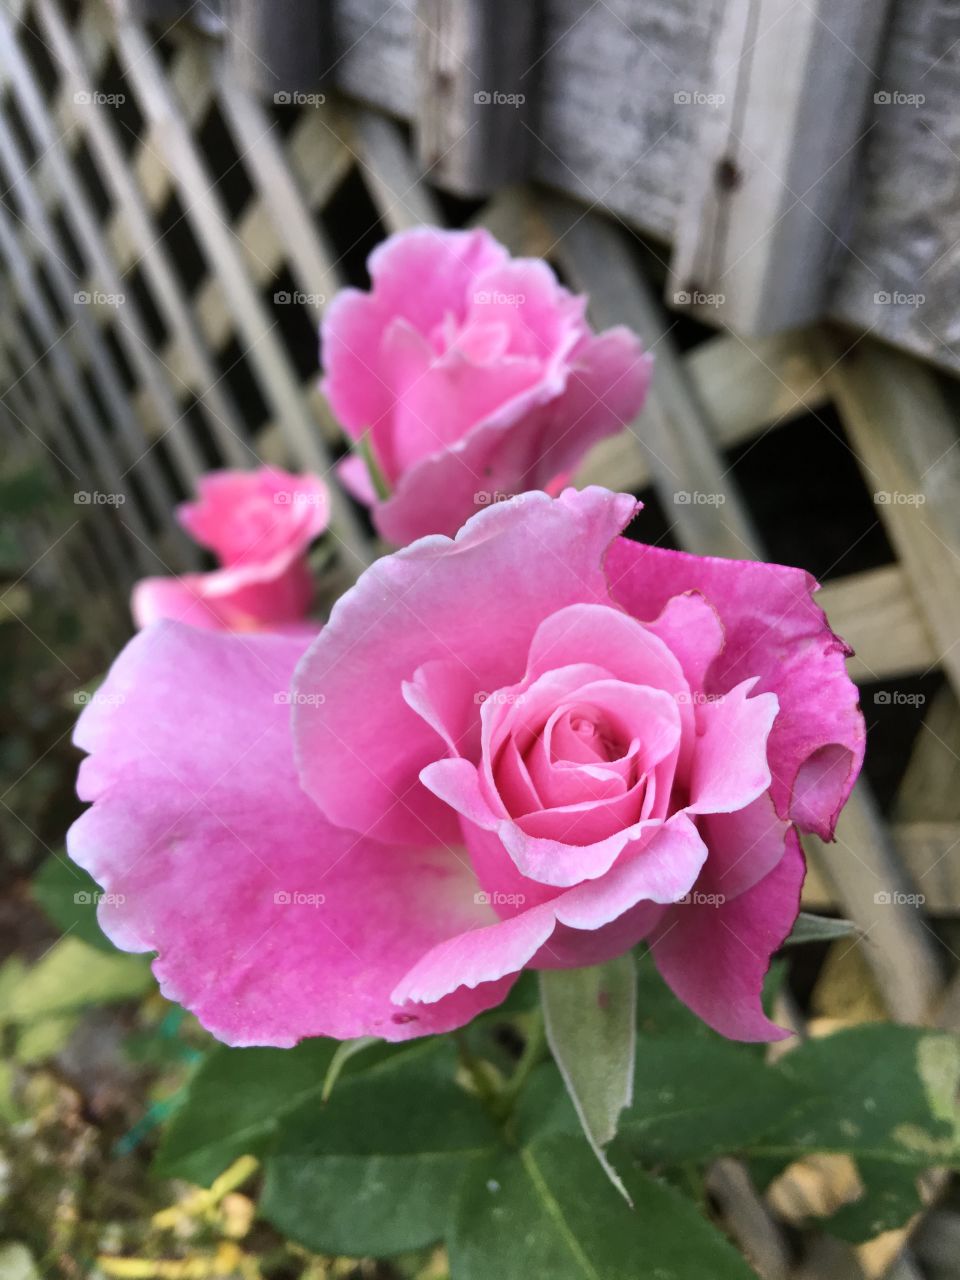 Sunlit pink rose bush with blooms opening!